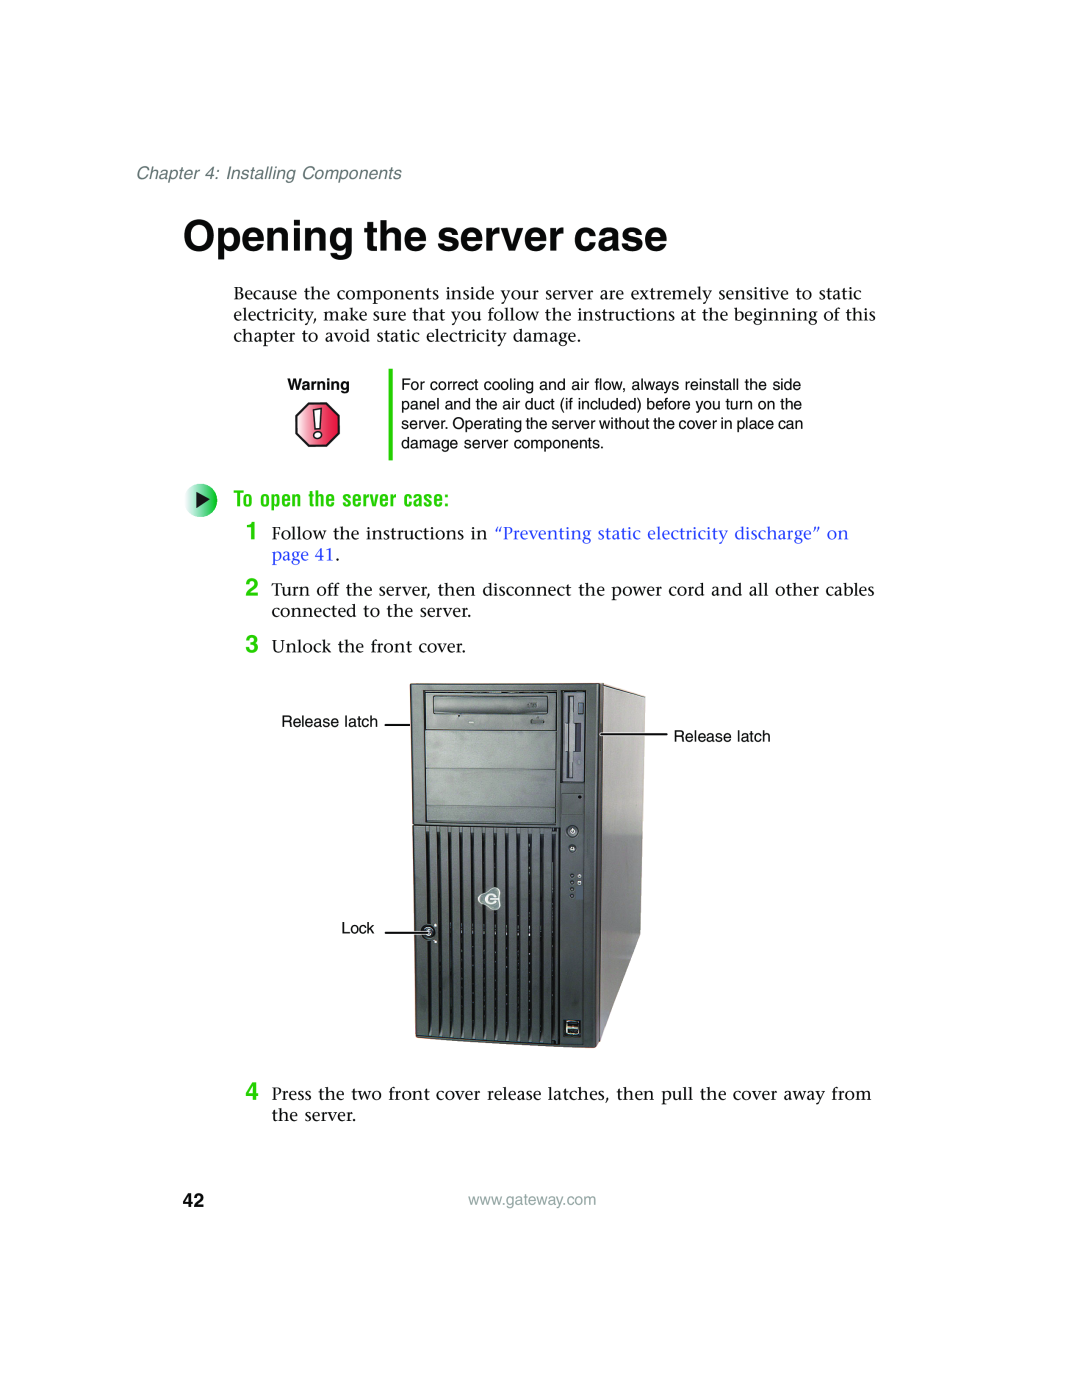 Gateway 960 manual Opening the server case, To open the server case, Installing Components 